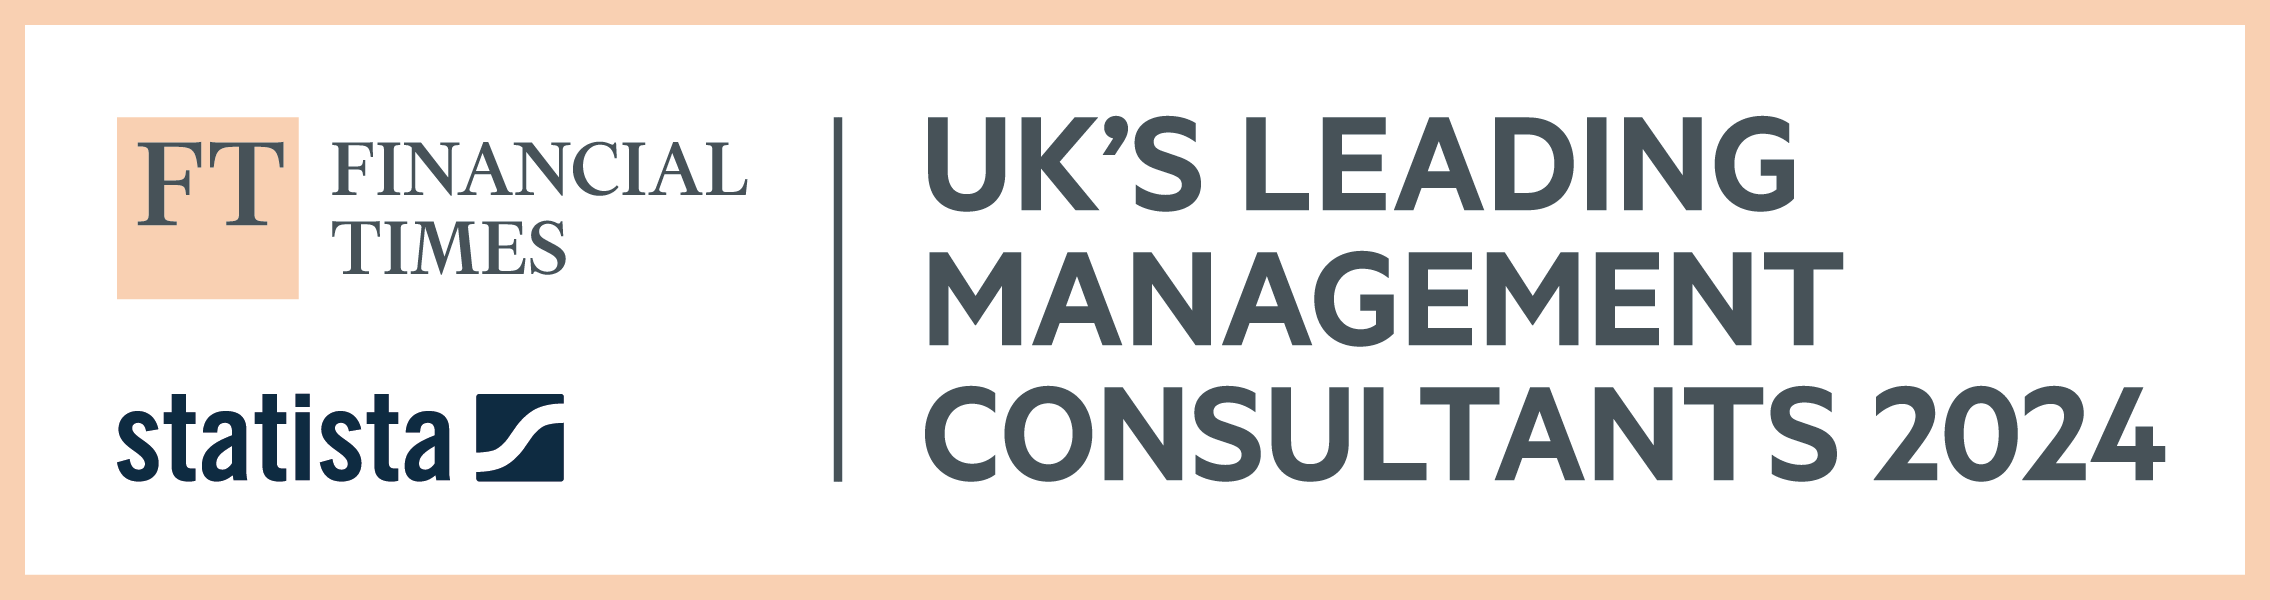 UK Financial Times Leading Management Consultancies